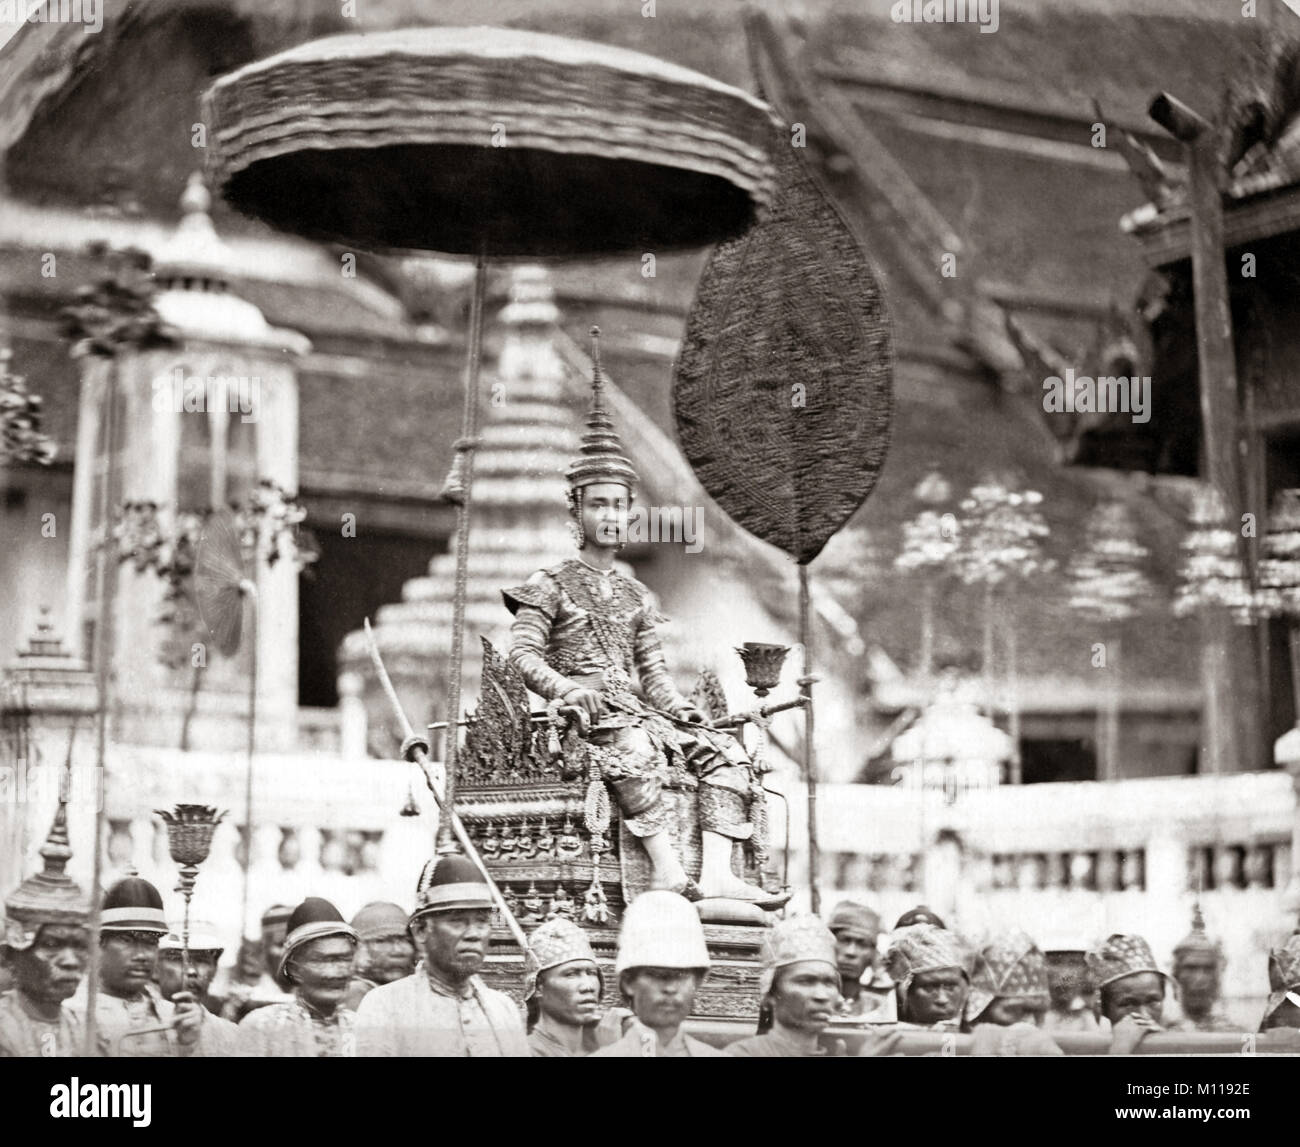 'Chulalongkorn the Great', Rama V, King of siam 1868 to 1910, in procession, Siam (Thailand) 1880's Stock Photo